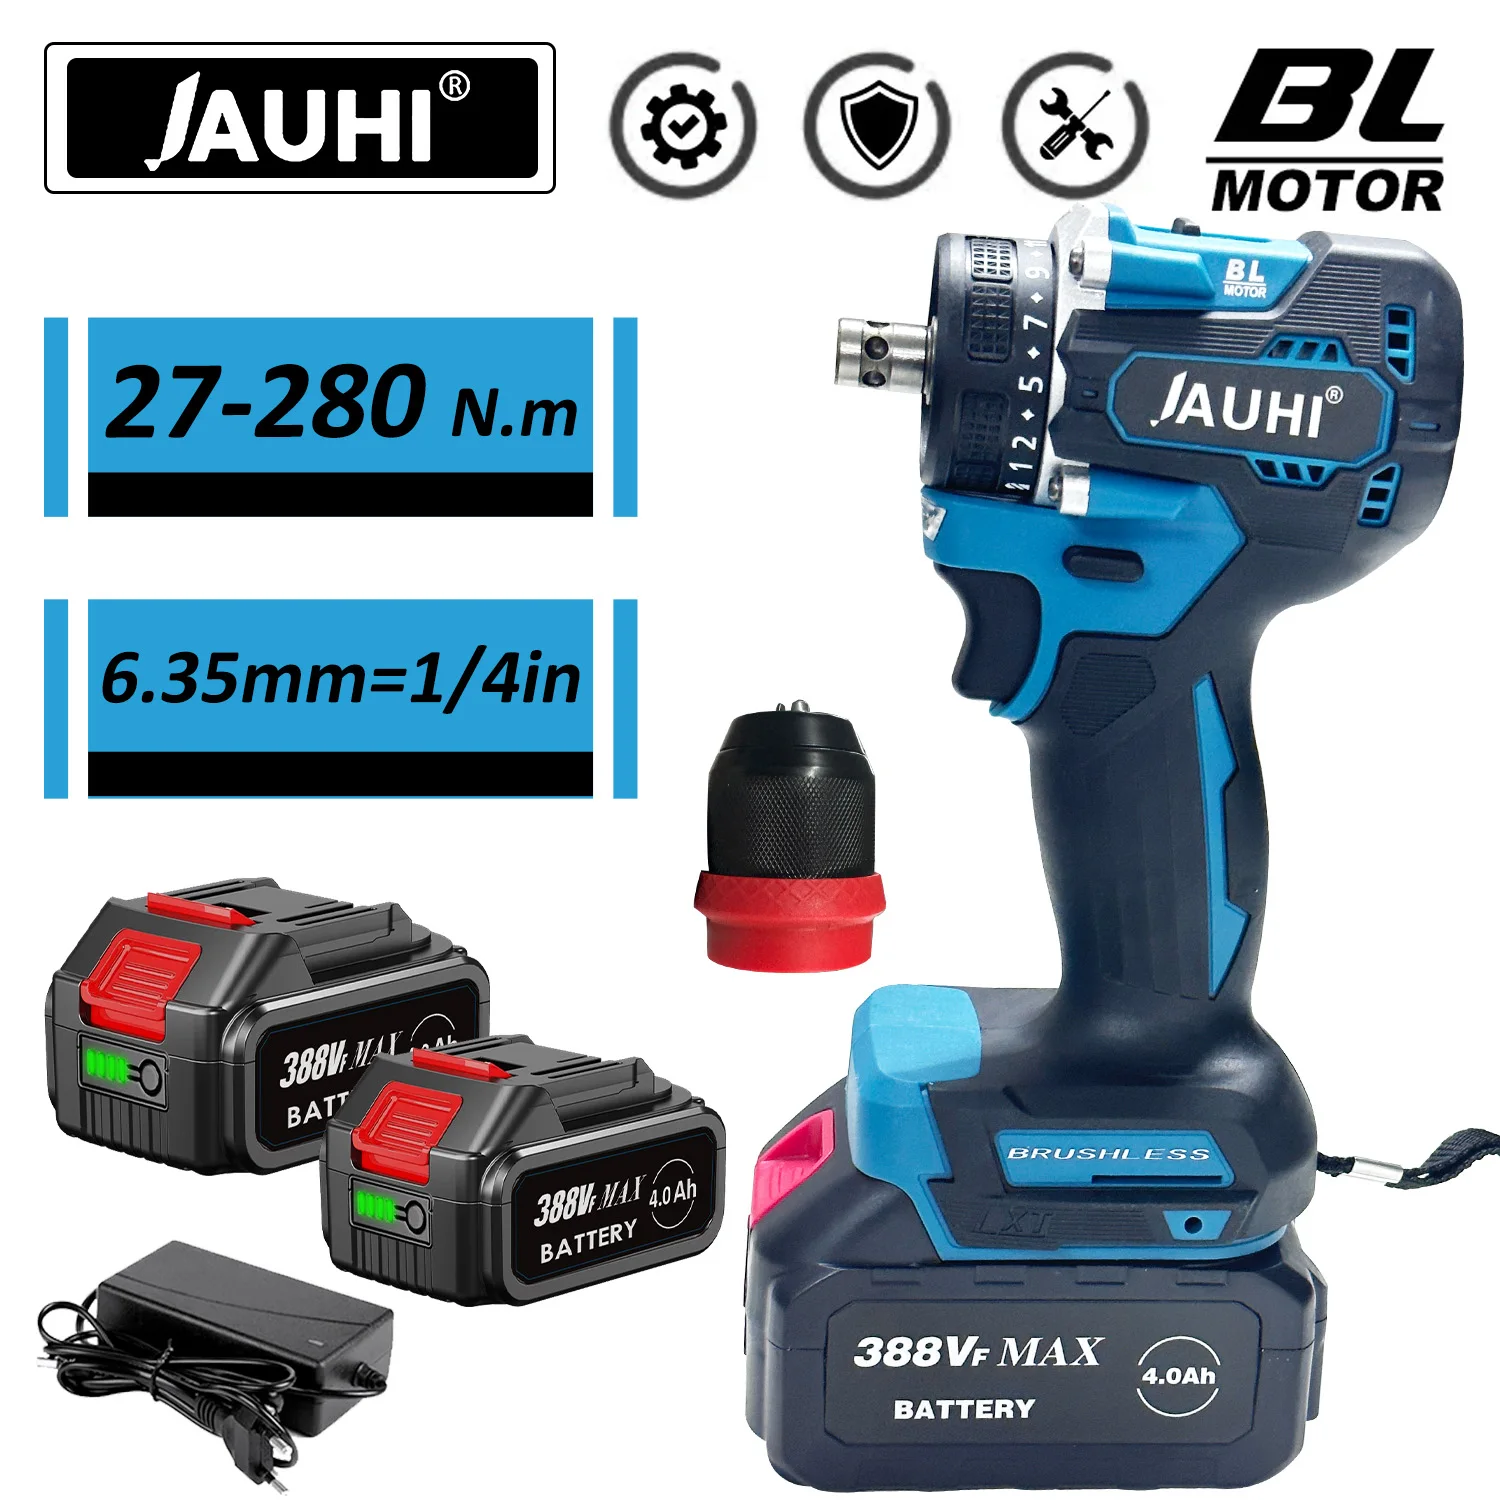 

JAUHI-Brushless Lithium Drill, Electric Screwdriver, Multi-Function Electric Screwdriver, Impact Drill, Power Tools